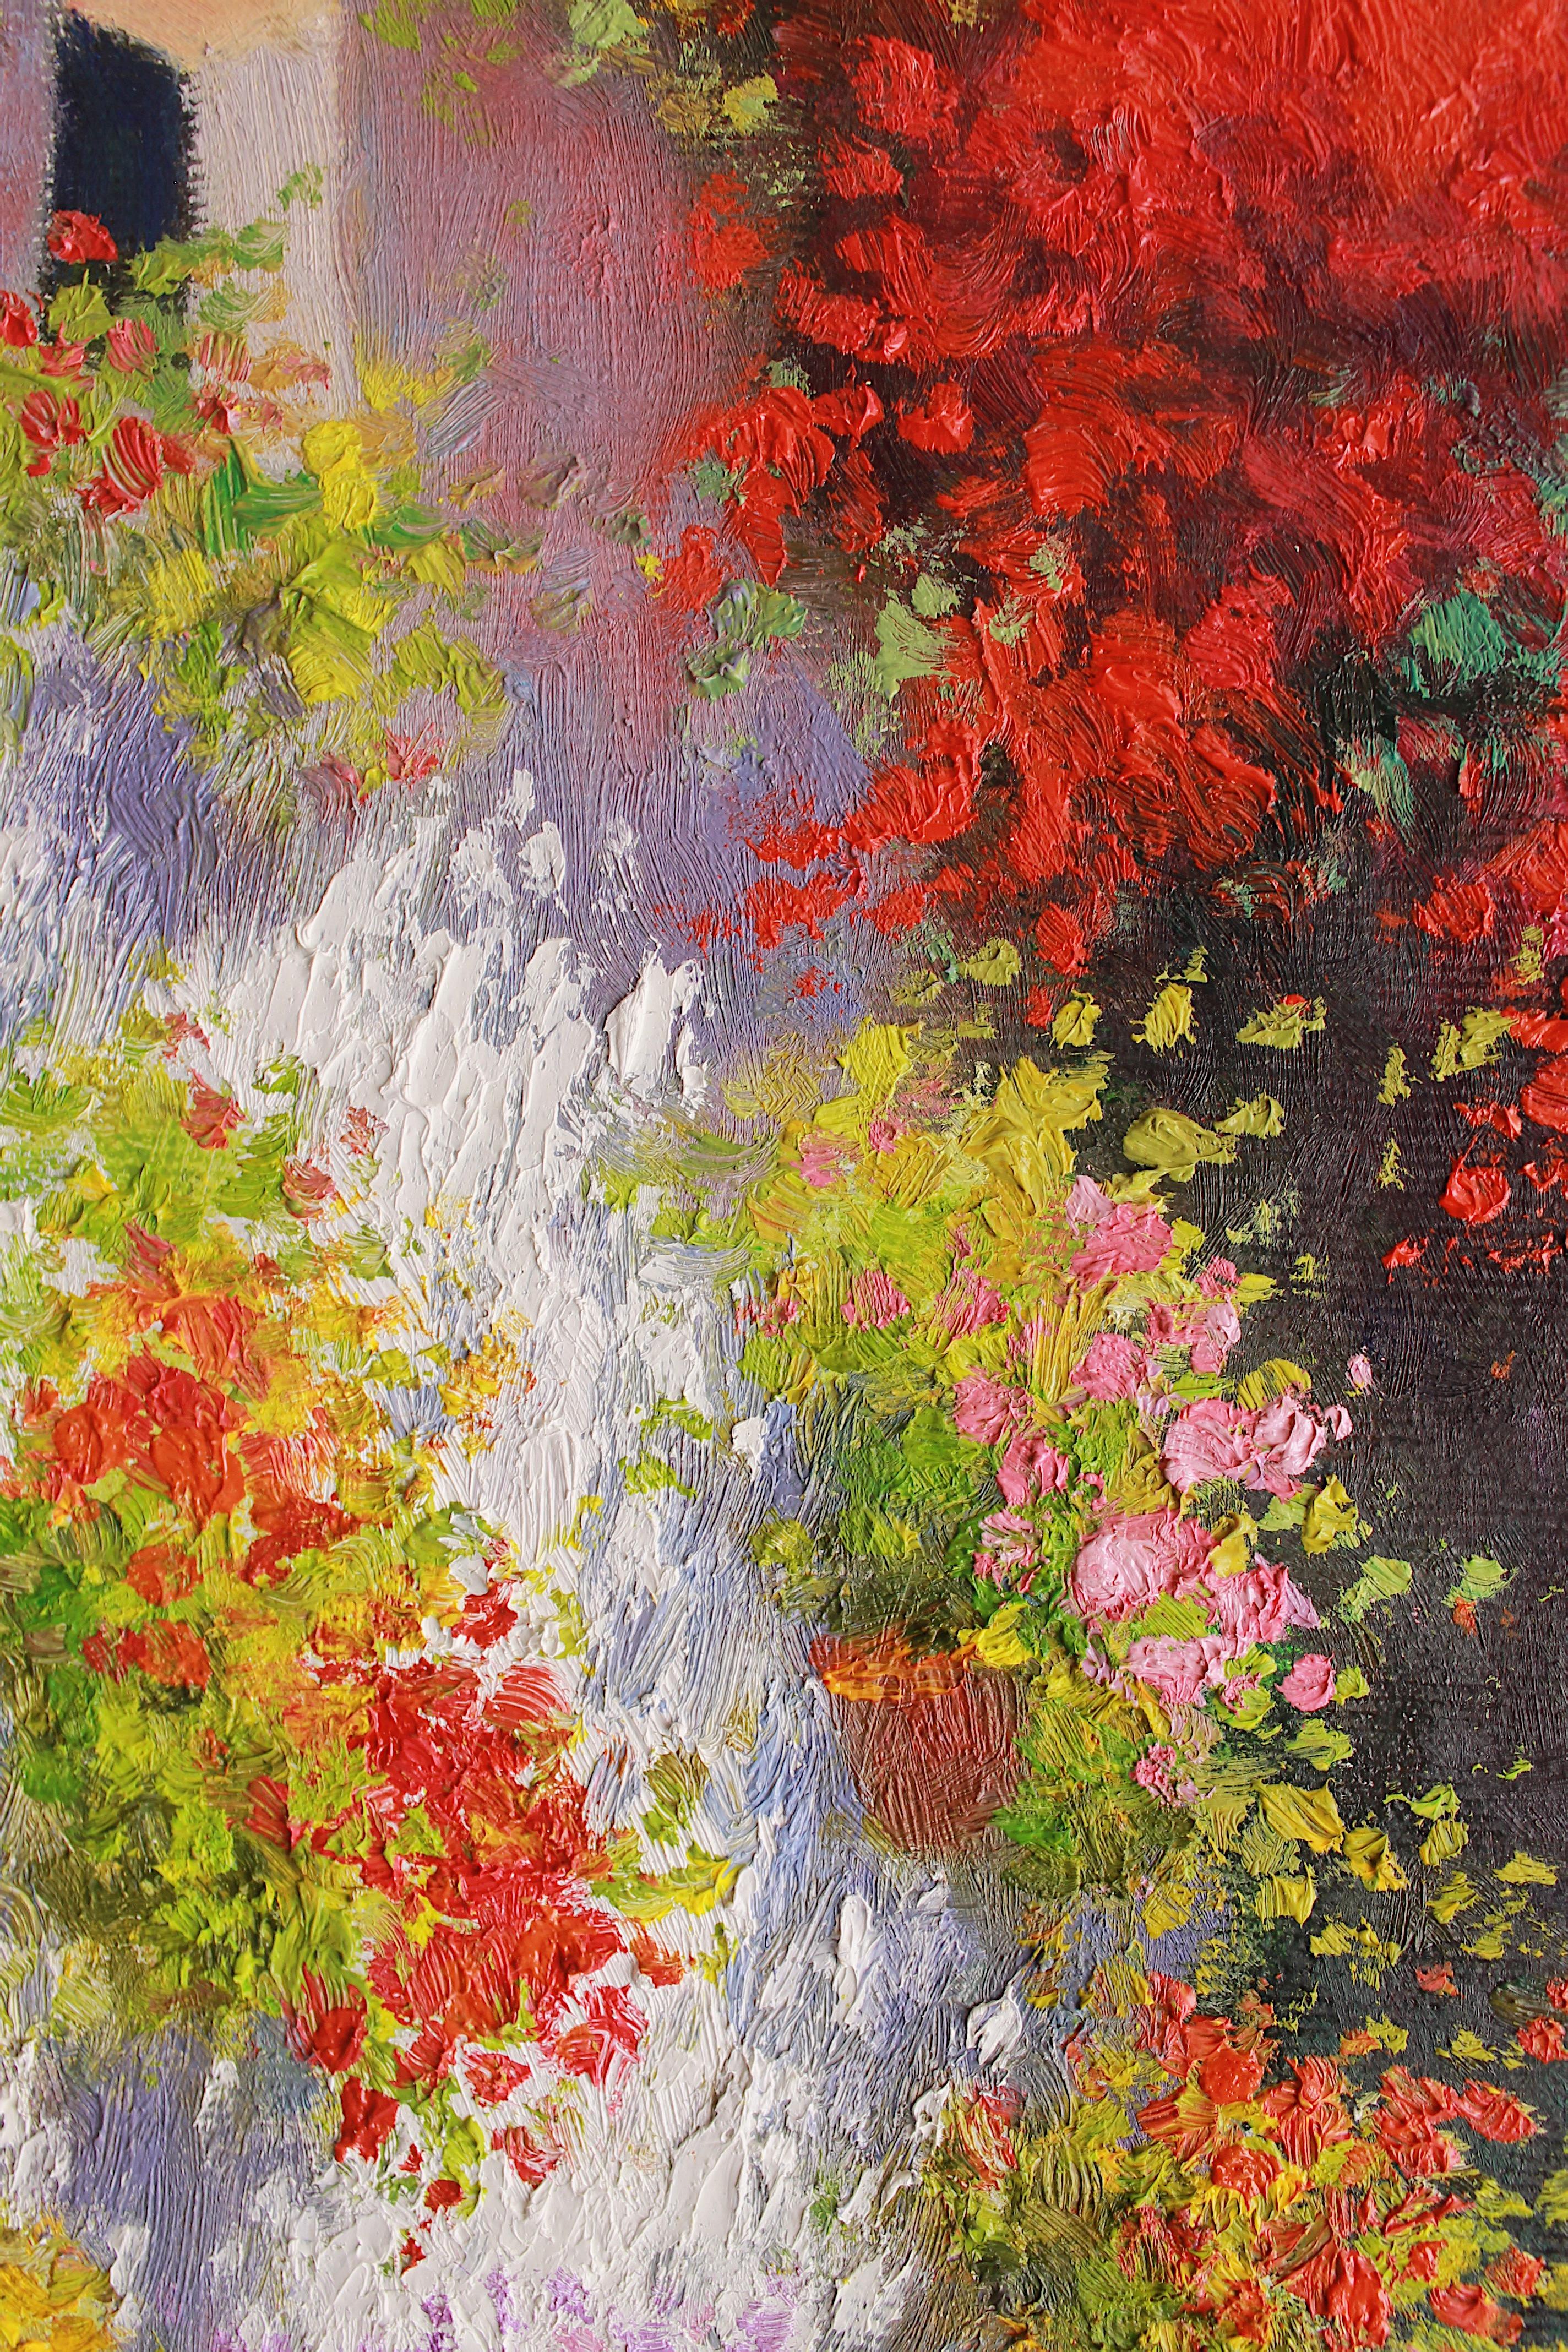 Arches and bougainvilleas - Original oil painting - Impressionist - Painting by Sonco Carrasco